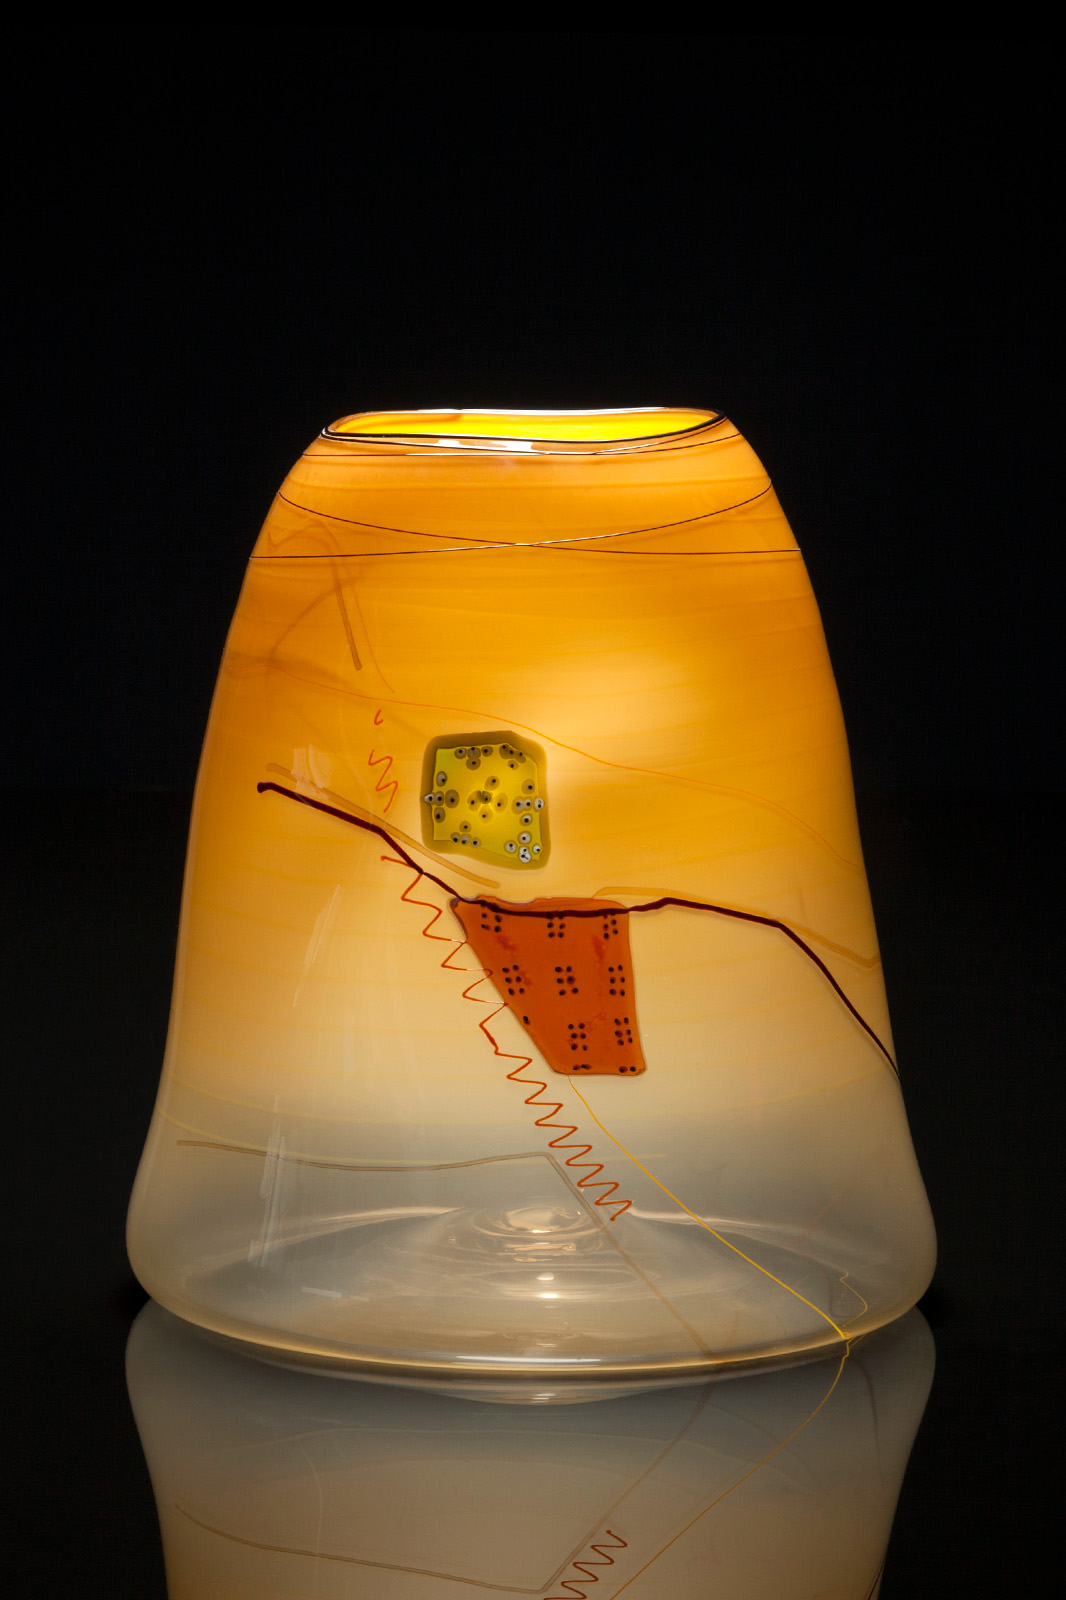 Dale Chihuly, Tabac Cylinder with Drawing Shards, 2014